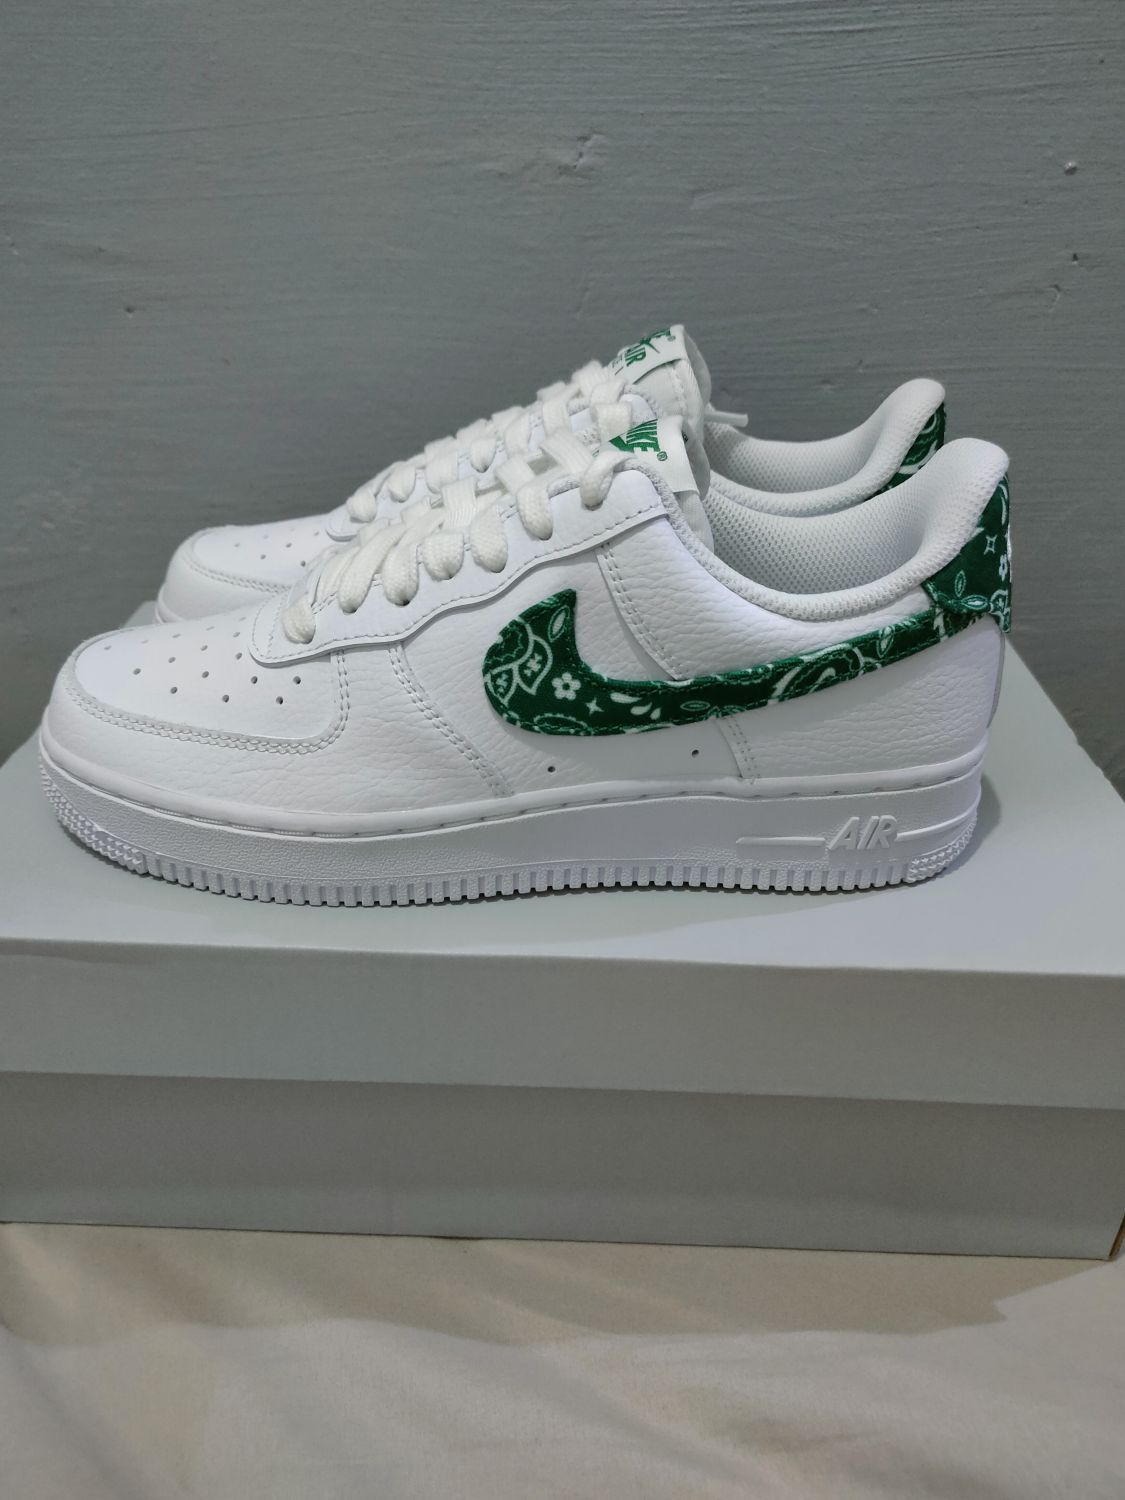 Nike Air Force 1 Low 07 Essential White Green Paisley (W) | AfterMarket